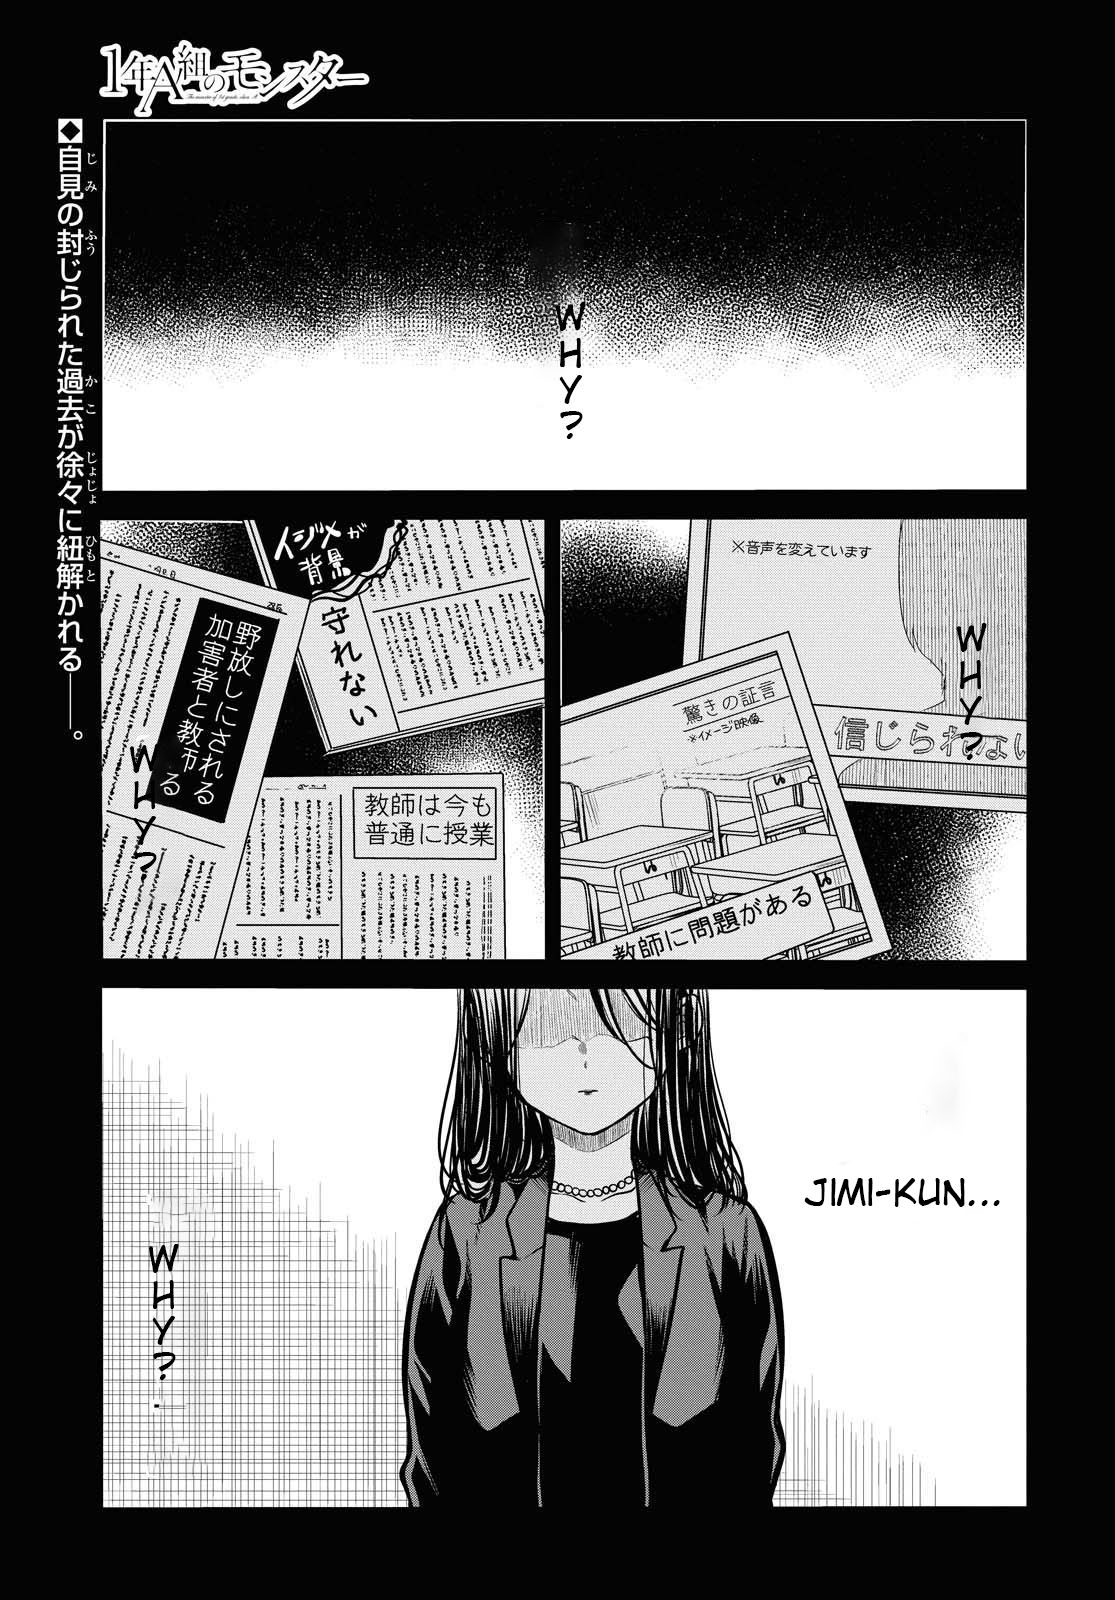 1-Nen A-Gumi No Monster - Page 2